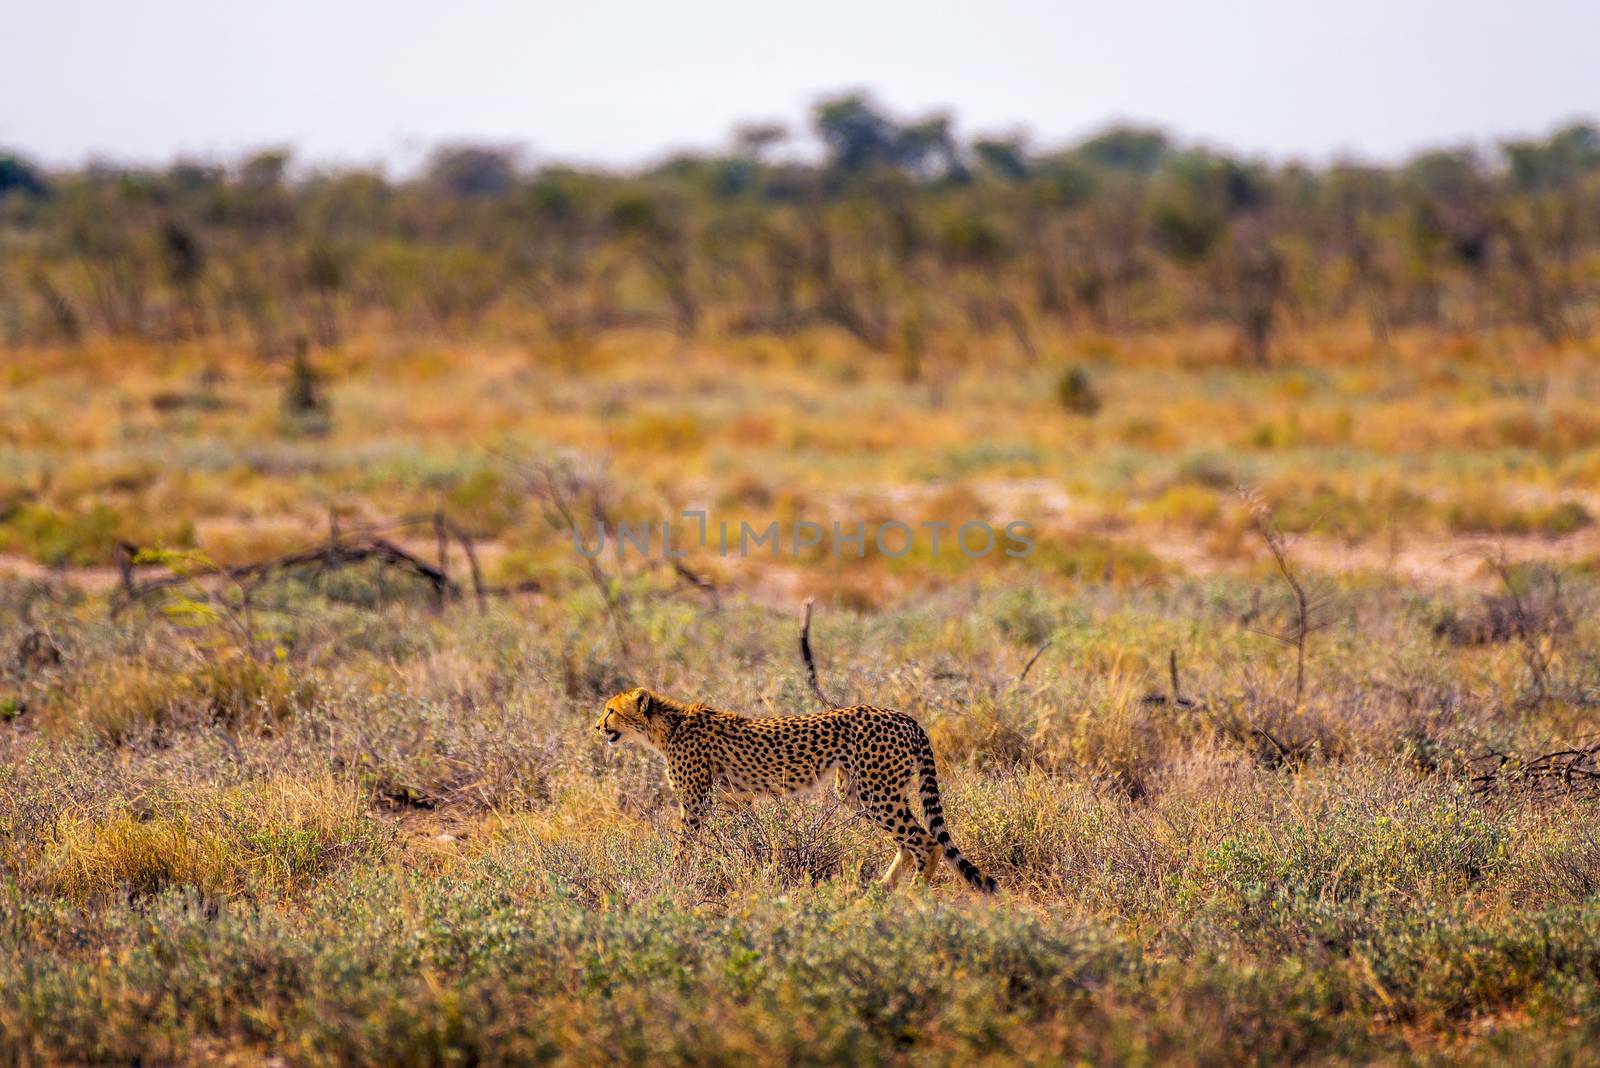 Cheetah lurking for prey at sunset in the Etosha National Park, Namibia by nickfox